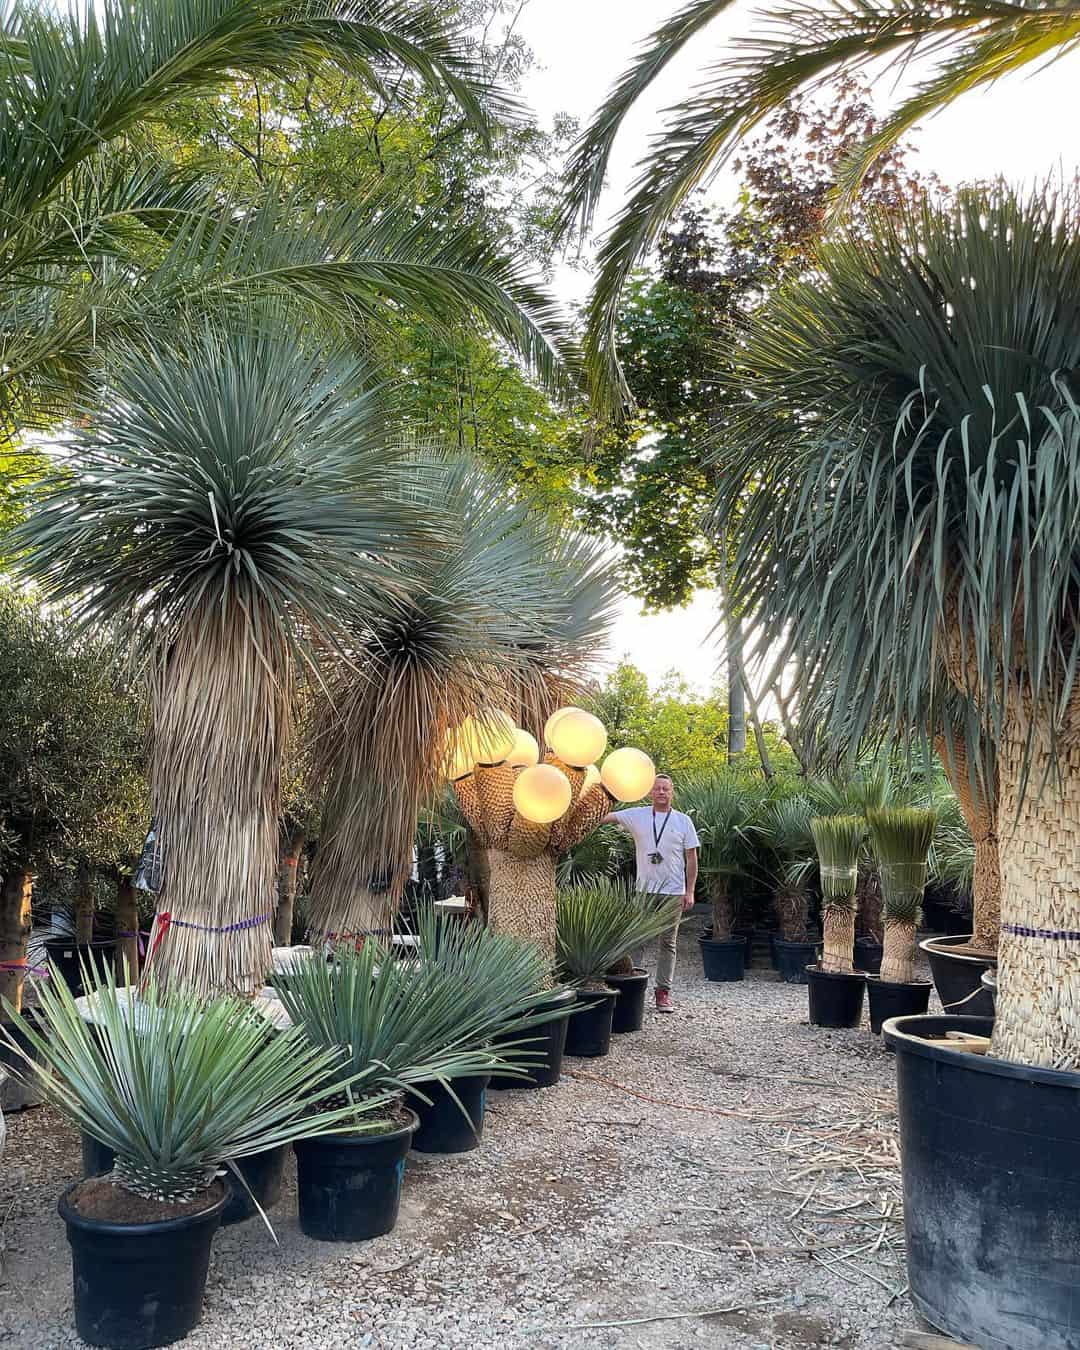 This is Yucca Rostrata.  (Not Yucca filamentosa - which will not get this big).  The yucca trunk re-purposed into a multi light by palmiarnia_krakow. 